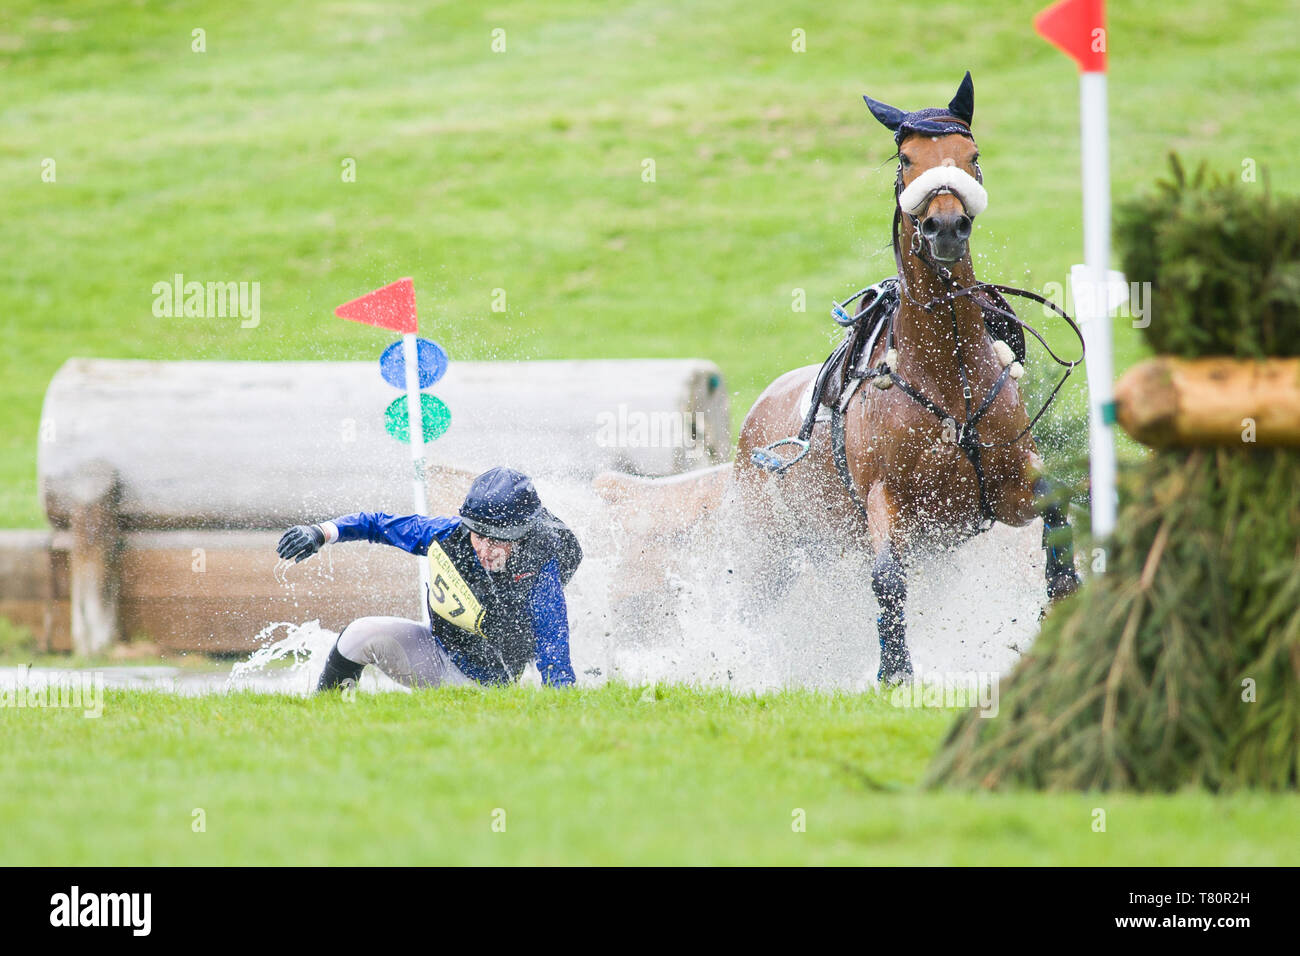 Kelso, Scottish Borders, UK. 10th May 2019. Rider 57 falls of her horse in the Cross Country in class CCI-S3* XC at the main water section on day 2 of the Floors Castle Horse Trials hosted in the grounds of Floors Castle, Kelso, Scottish Borders. Credit: Scottish Borders Media/Alamy Live News Stock Photo